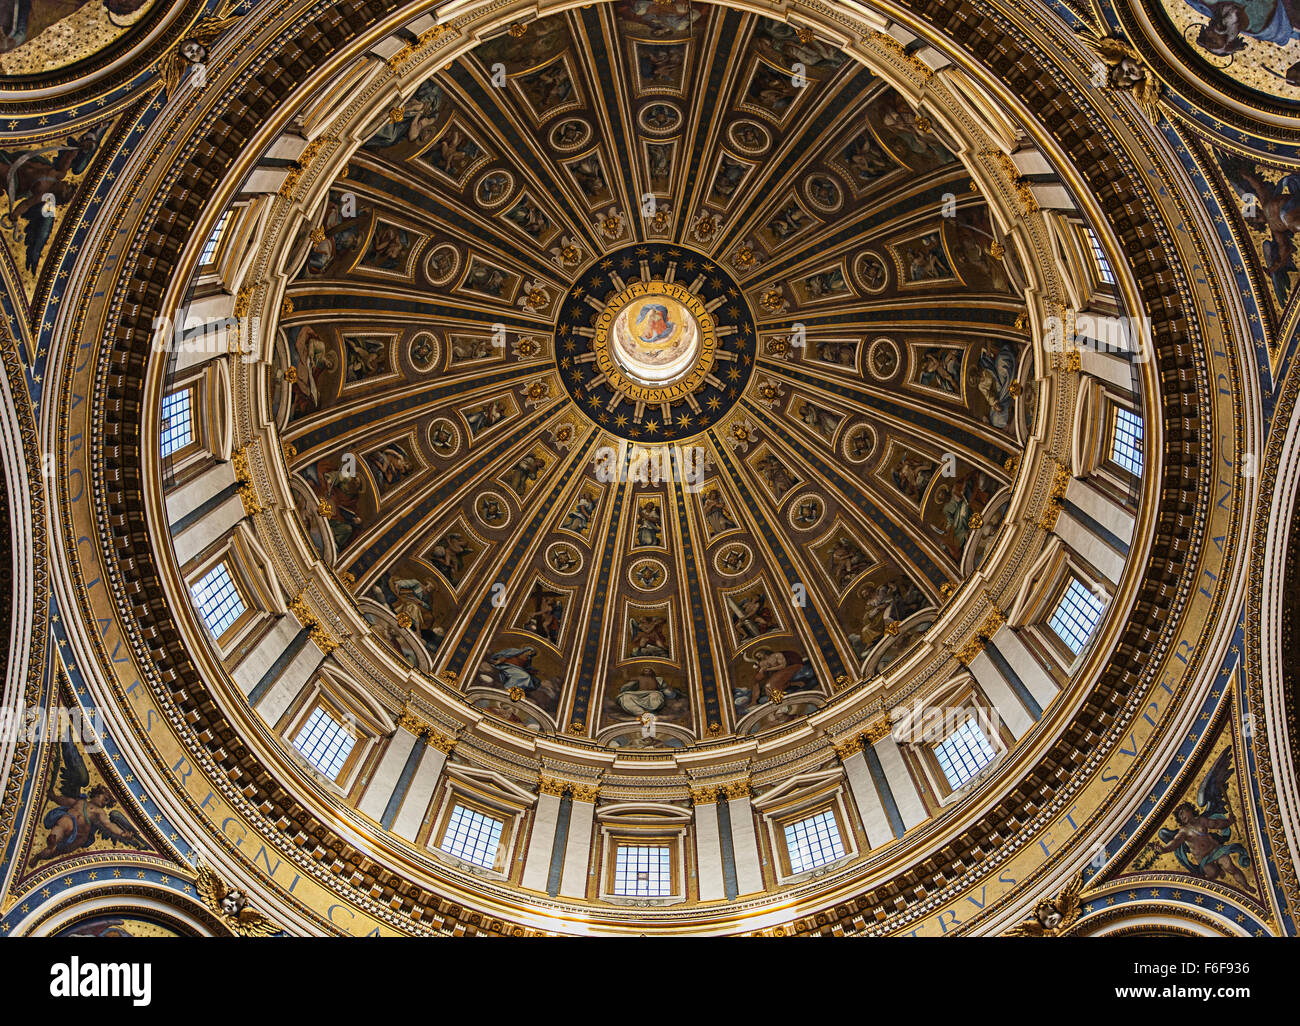 Dome of St. Peter's Basilica Stock Photo